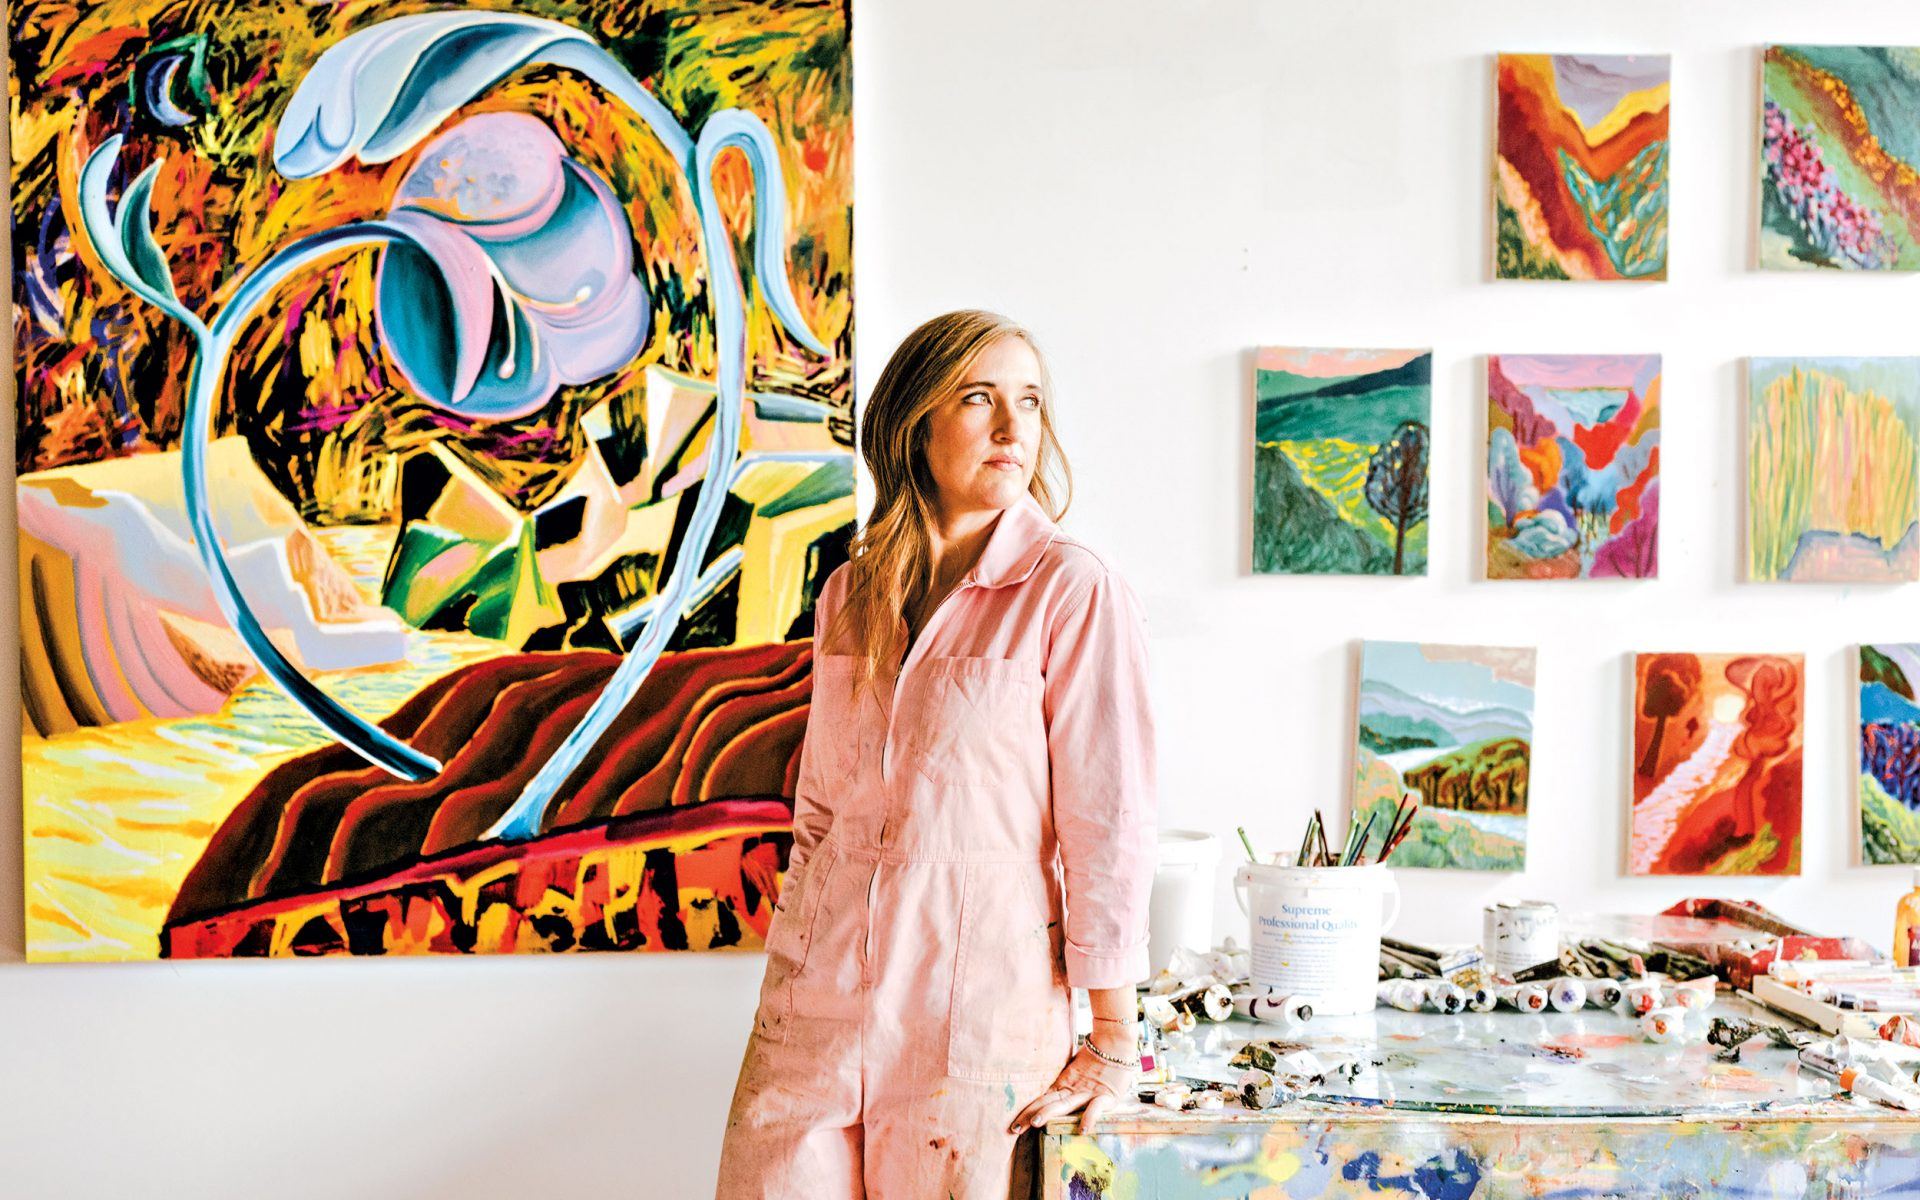 See How Fast-Rising Painter Shara Hughes Creates Her Imaginative Landscapes - Galerie